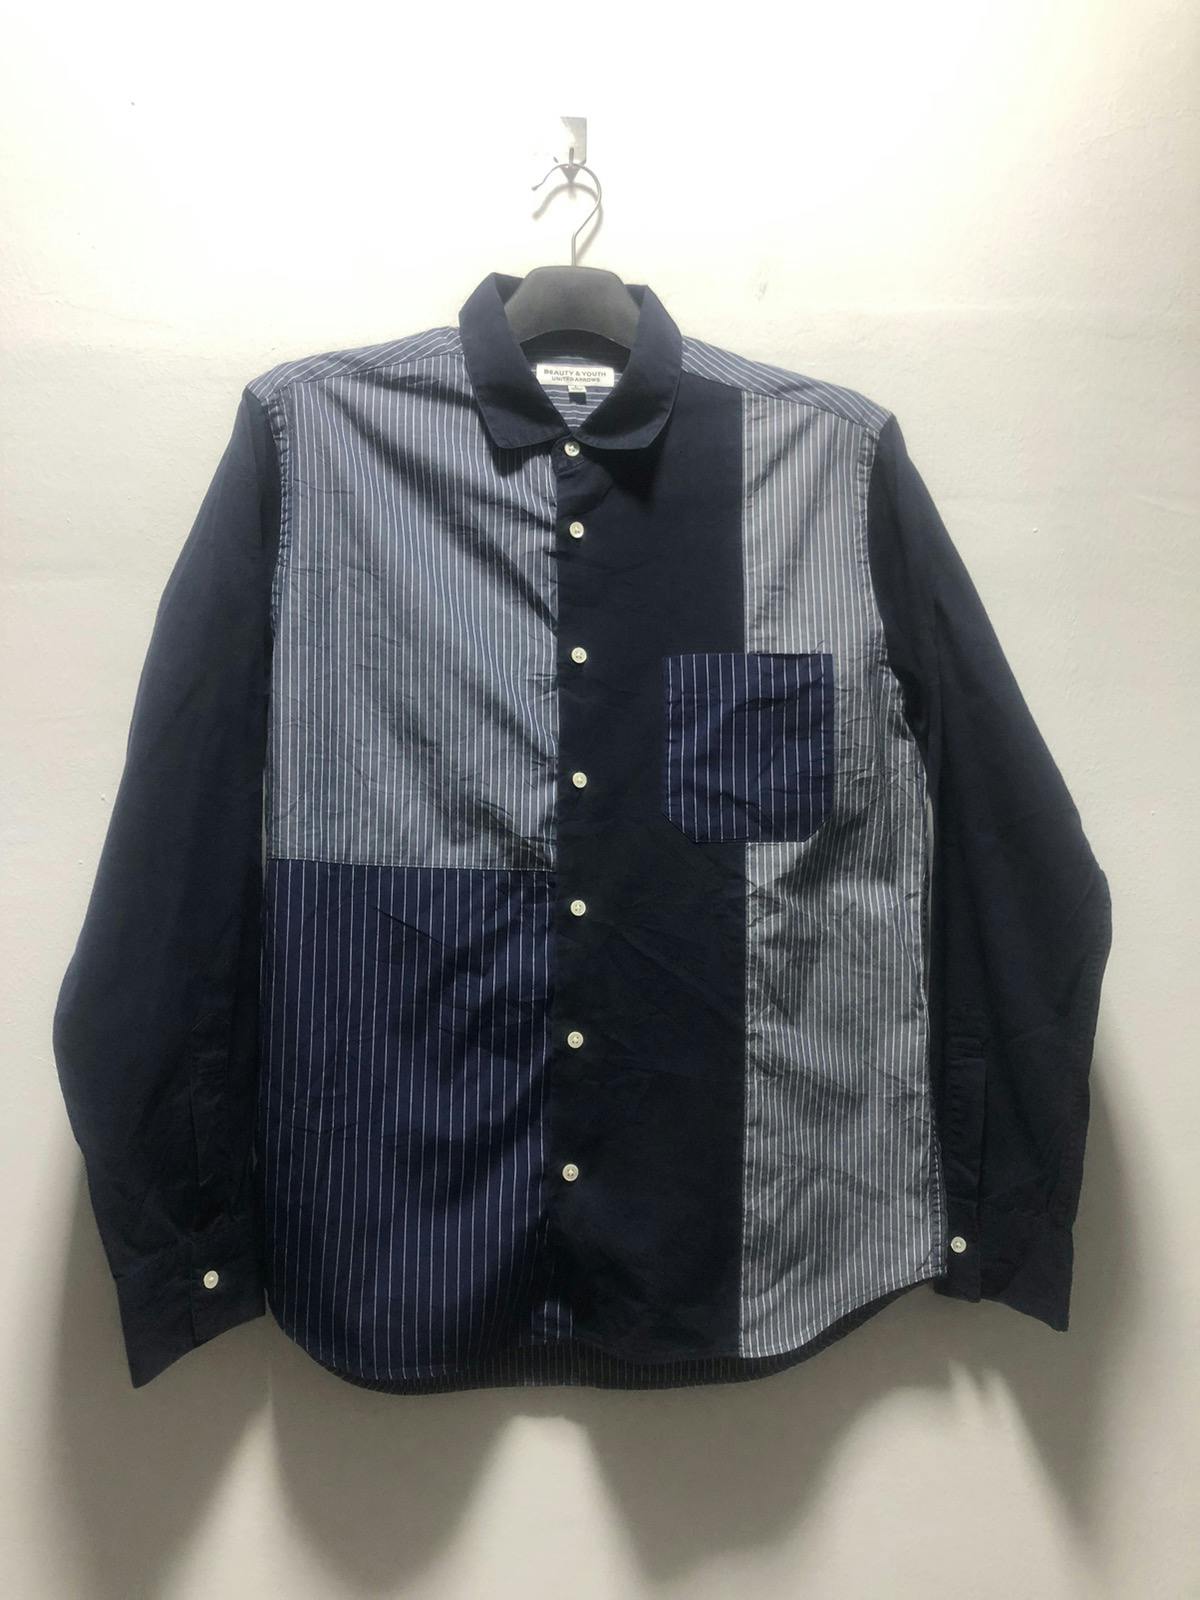 BEAUTY & YOUTH Shirt UNITED ARROWS Patch - 1